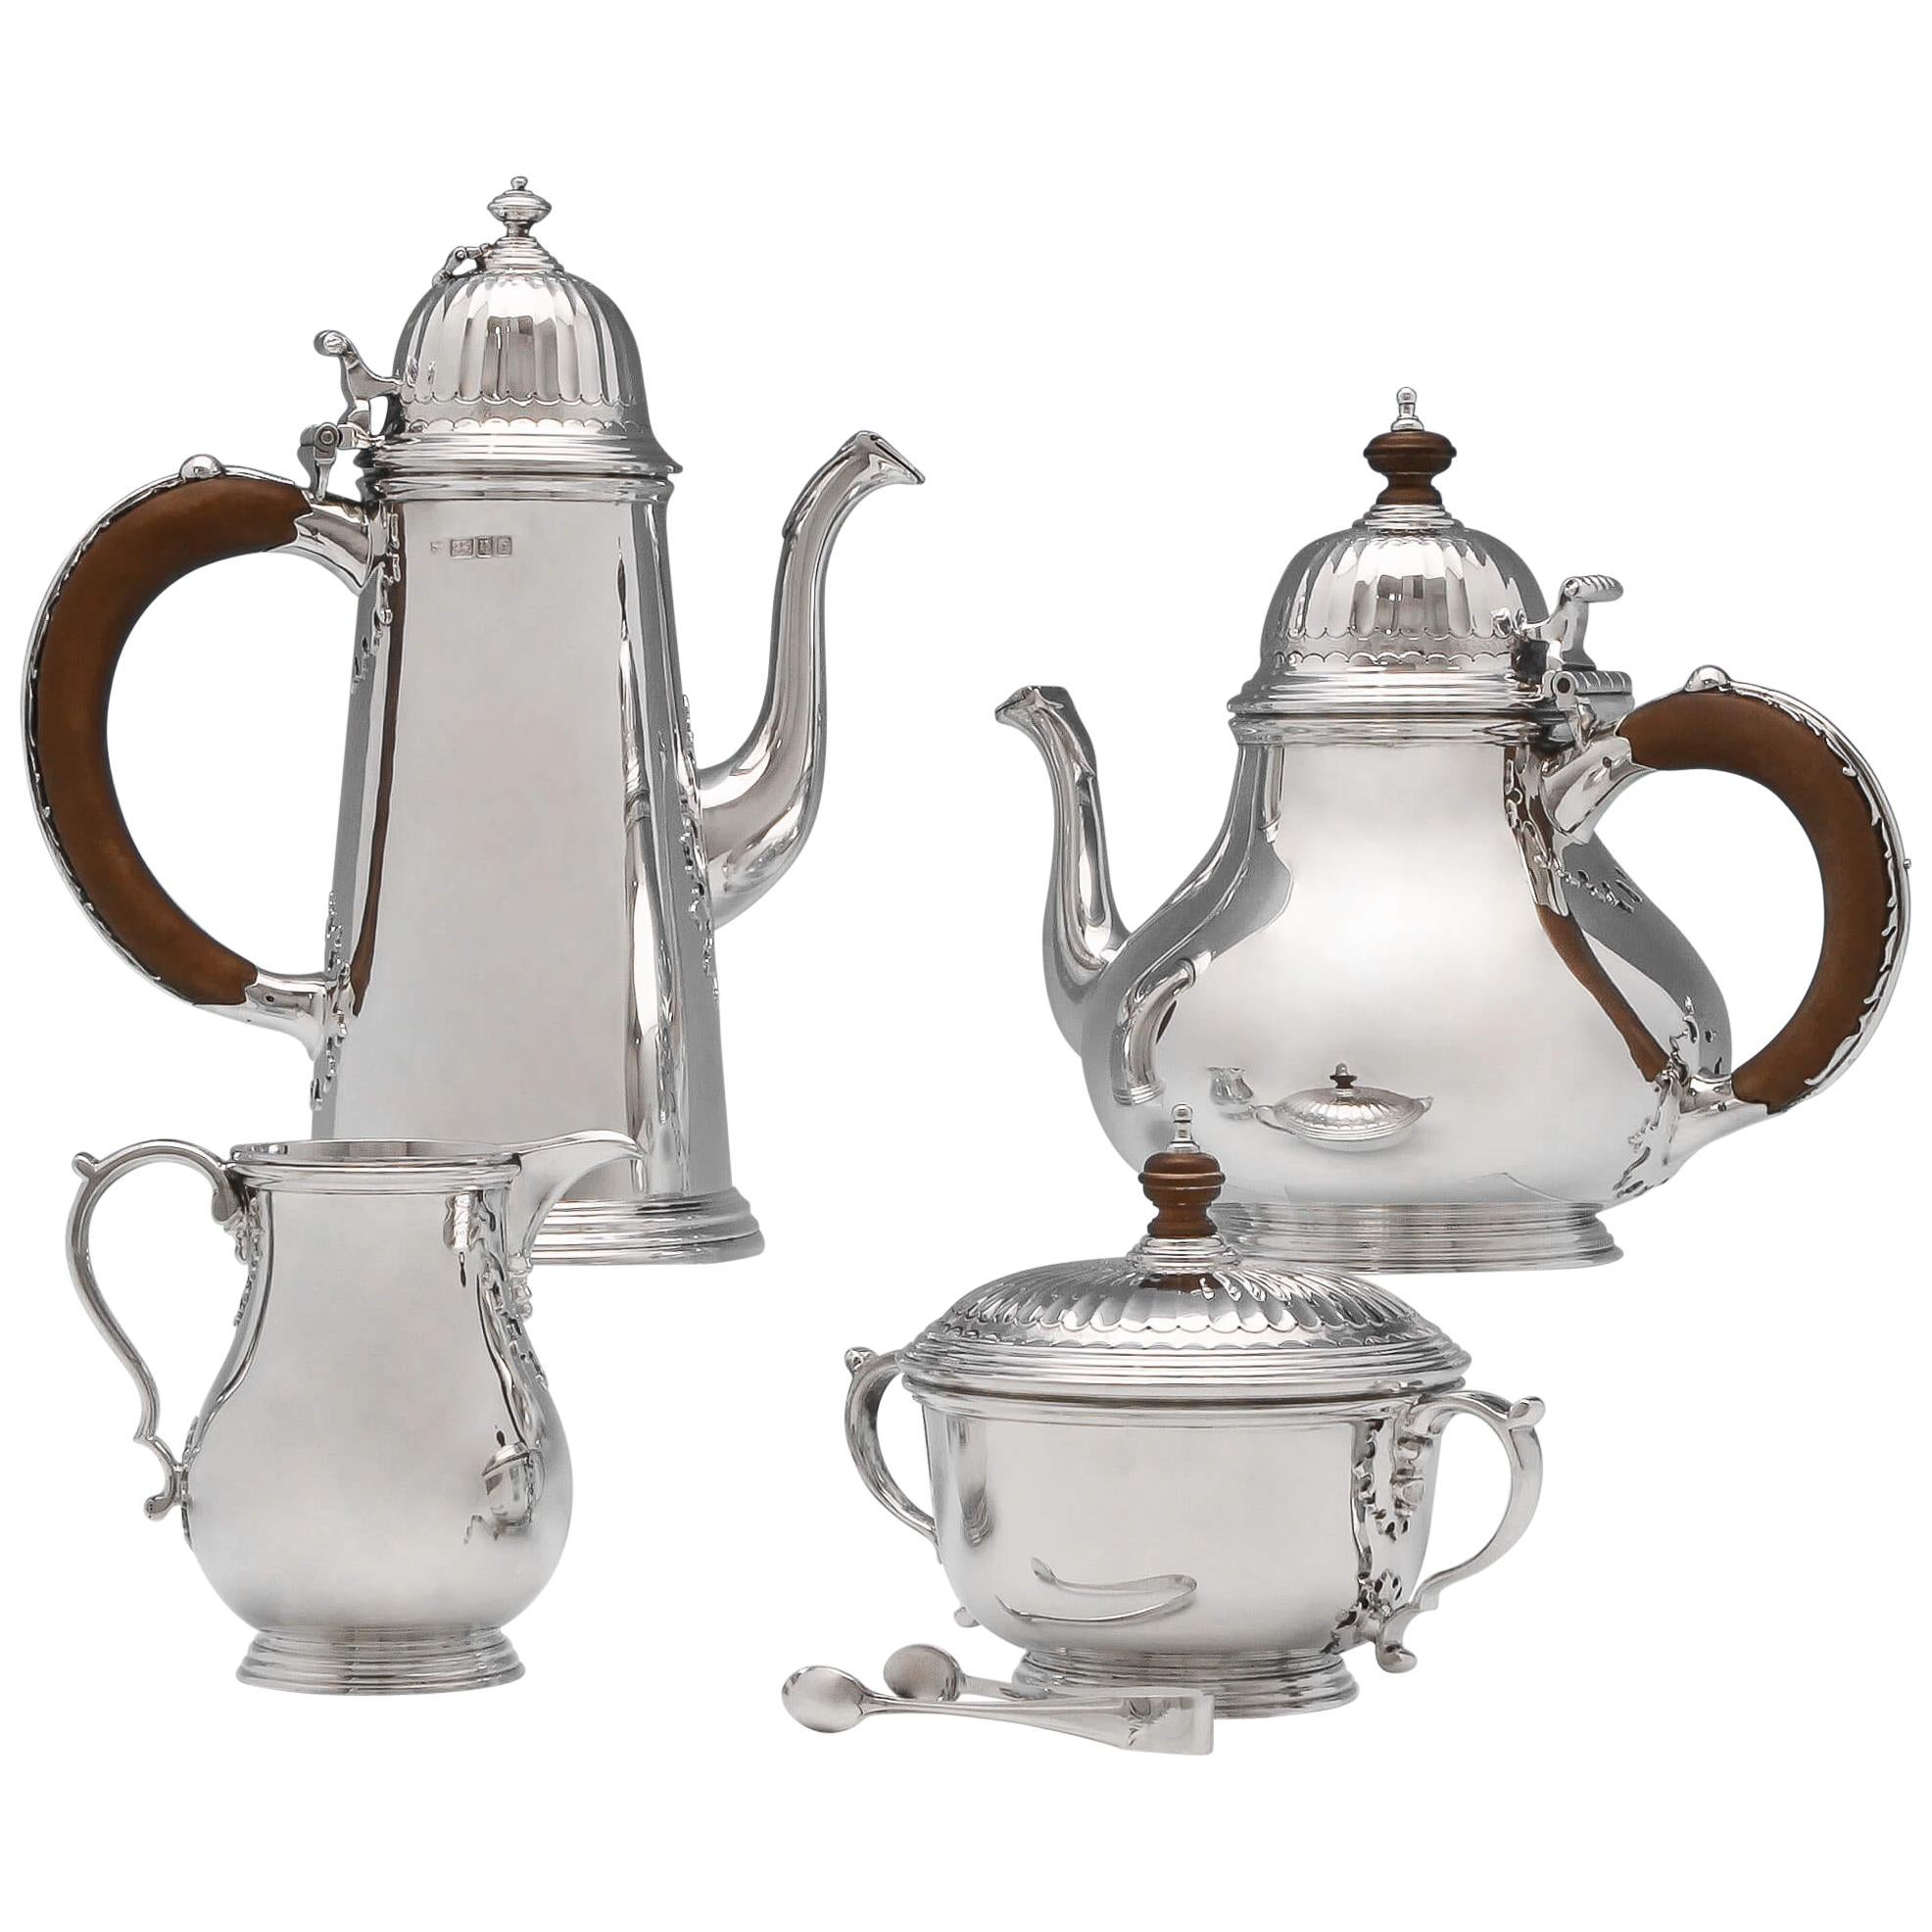 Queen Anne Revival Heavy Sterling Silver Tea Set by William Comyns in 1964